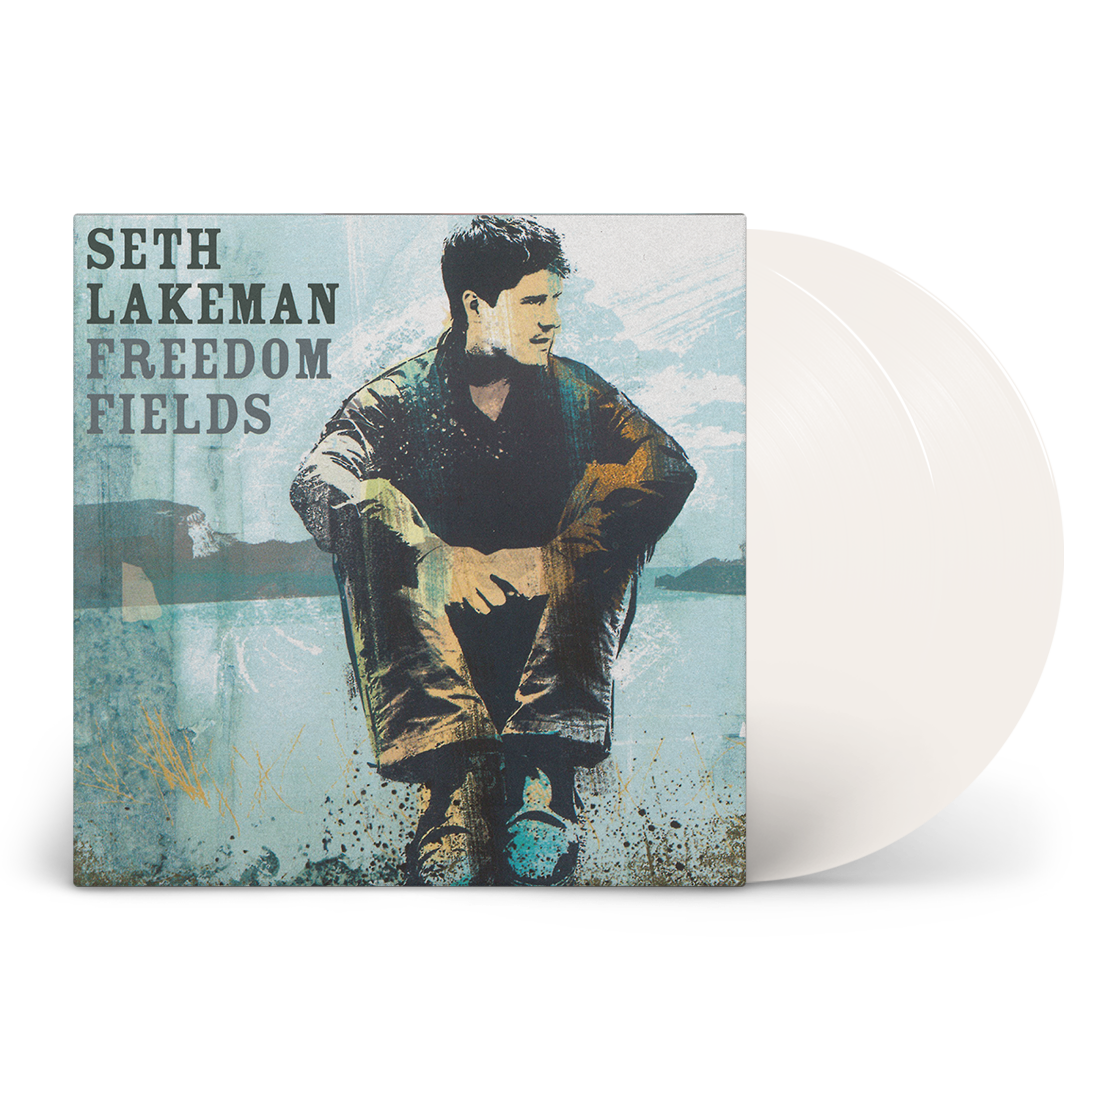 SETH LAKEMAN – Freedom Fields 15th Anniversary Edition OUT JANUARY 14TH 2022